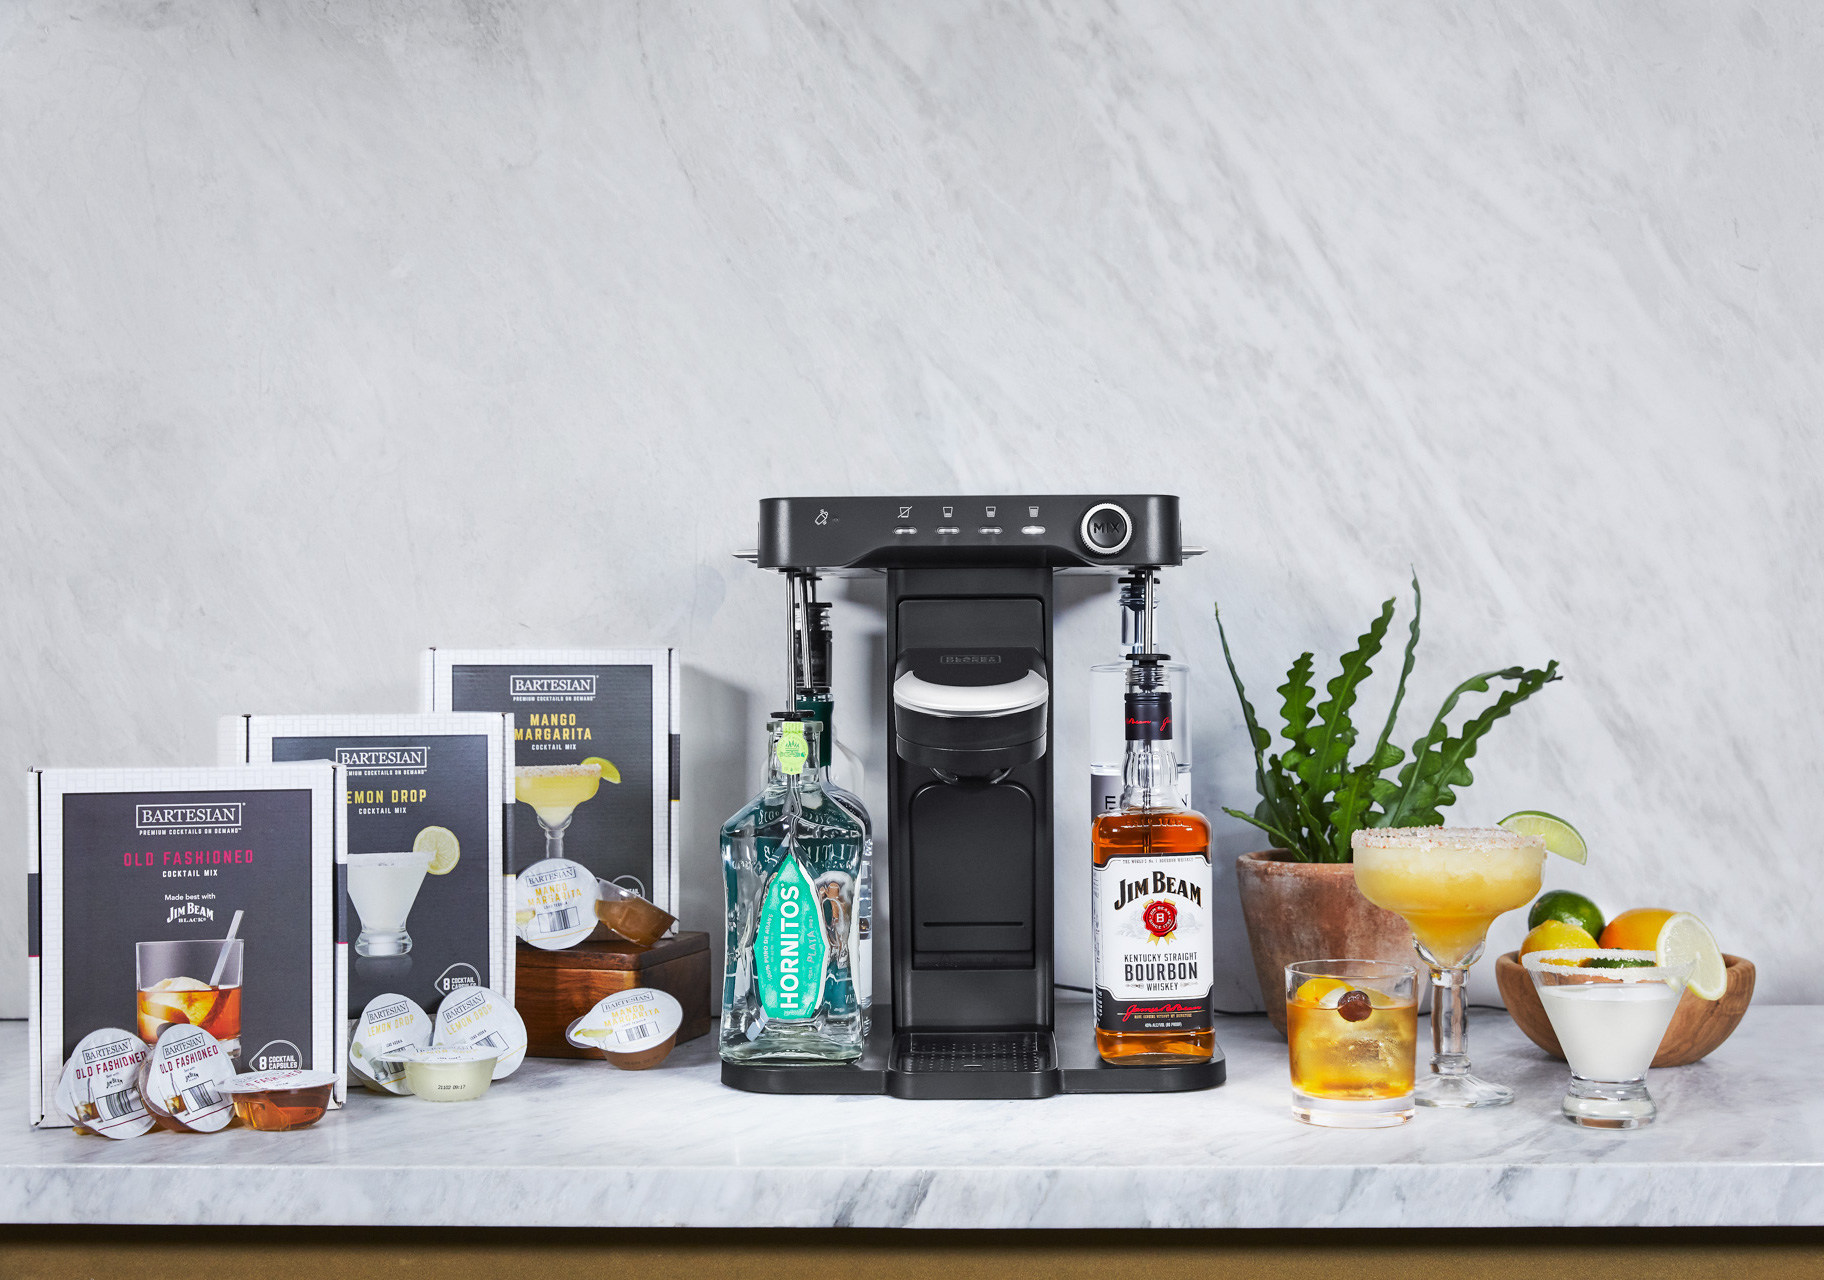 A Toast to Innovation: BLACK+DECKER® and Bartesian™ Shake Up Craft